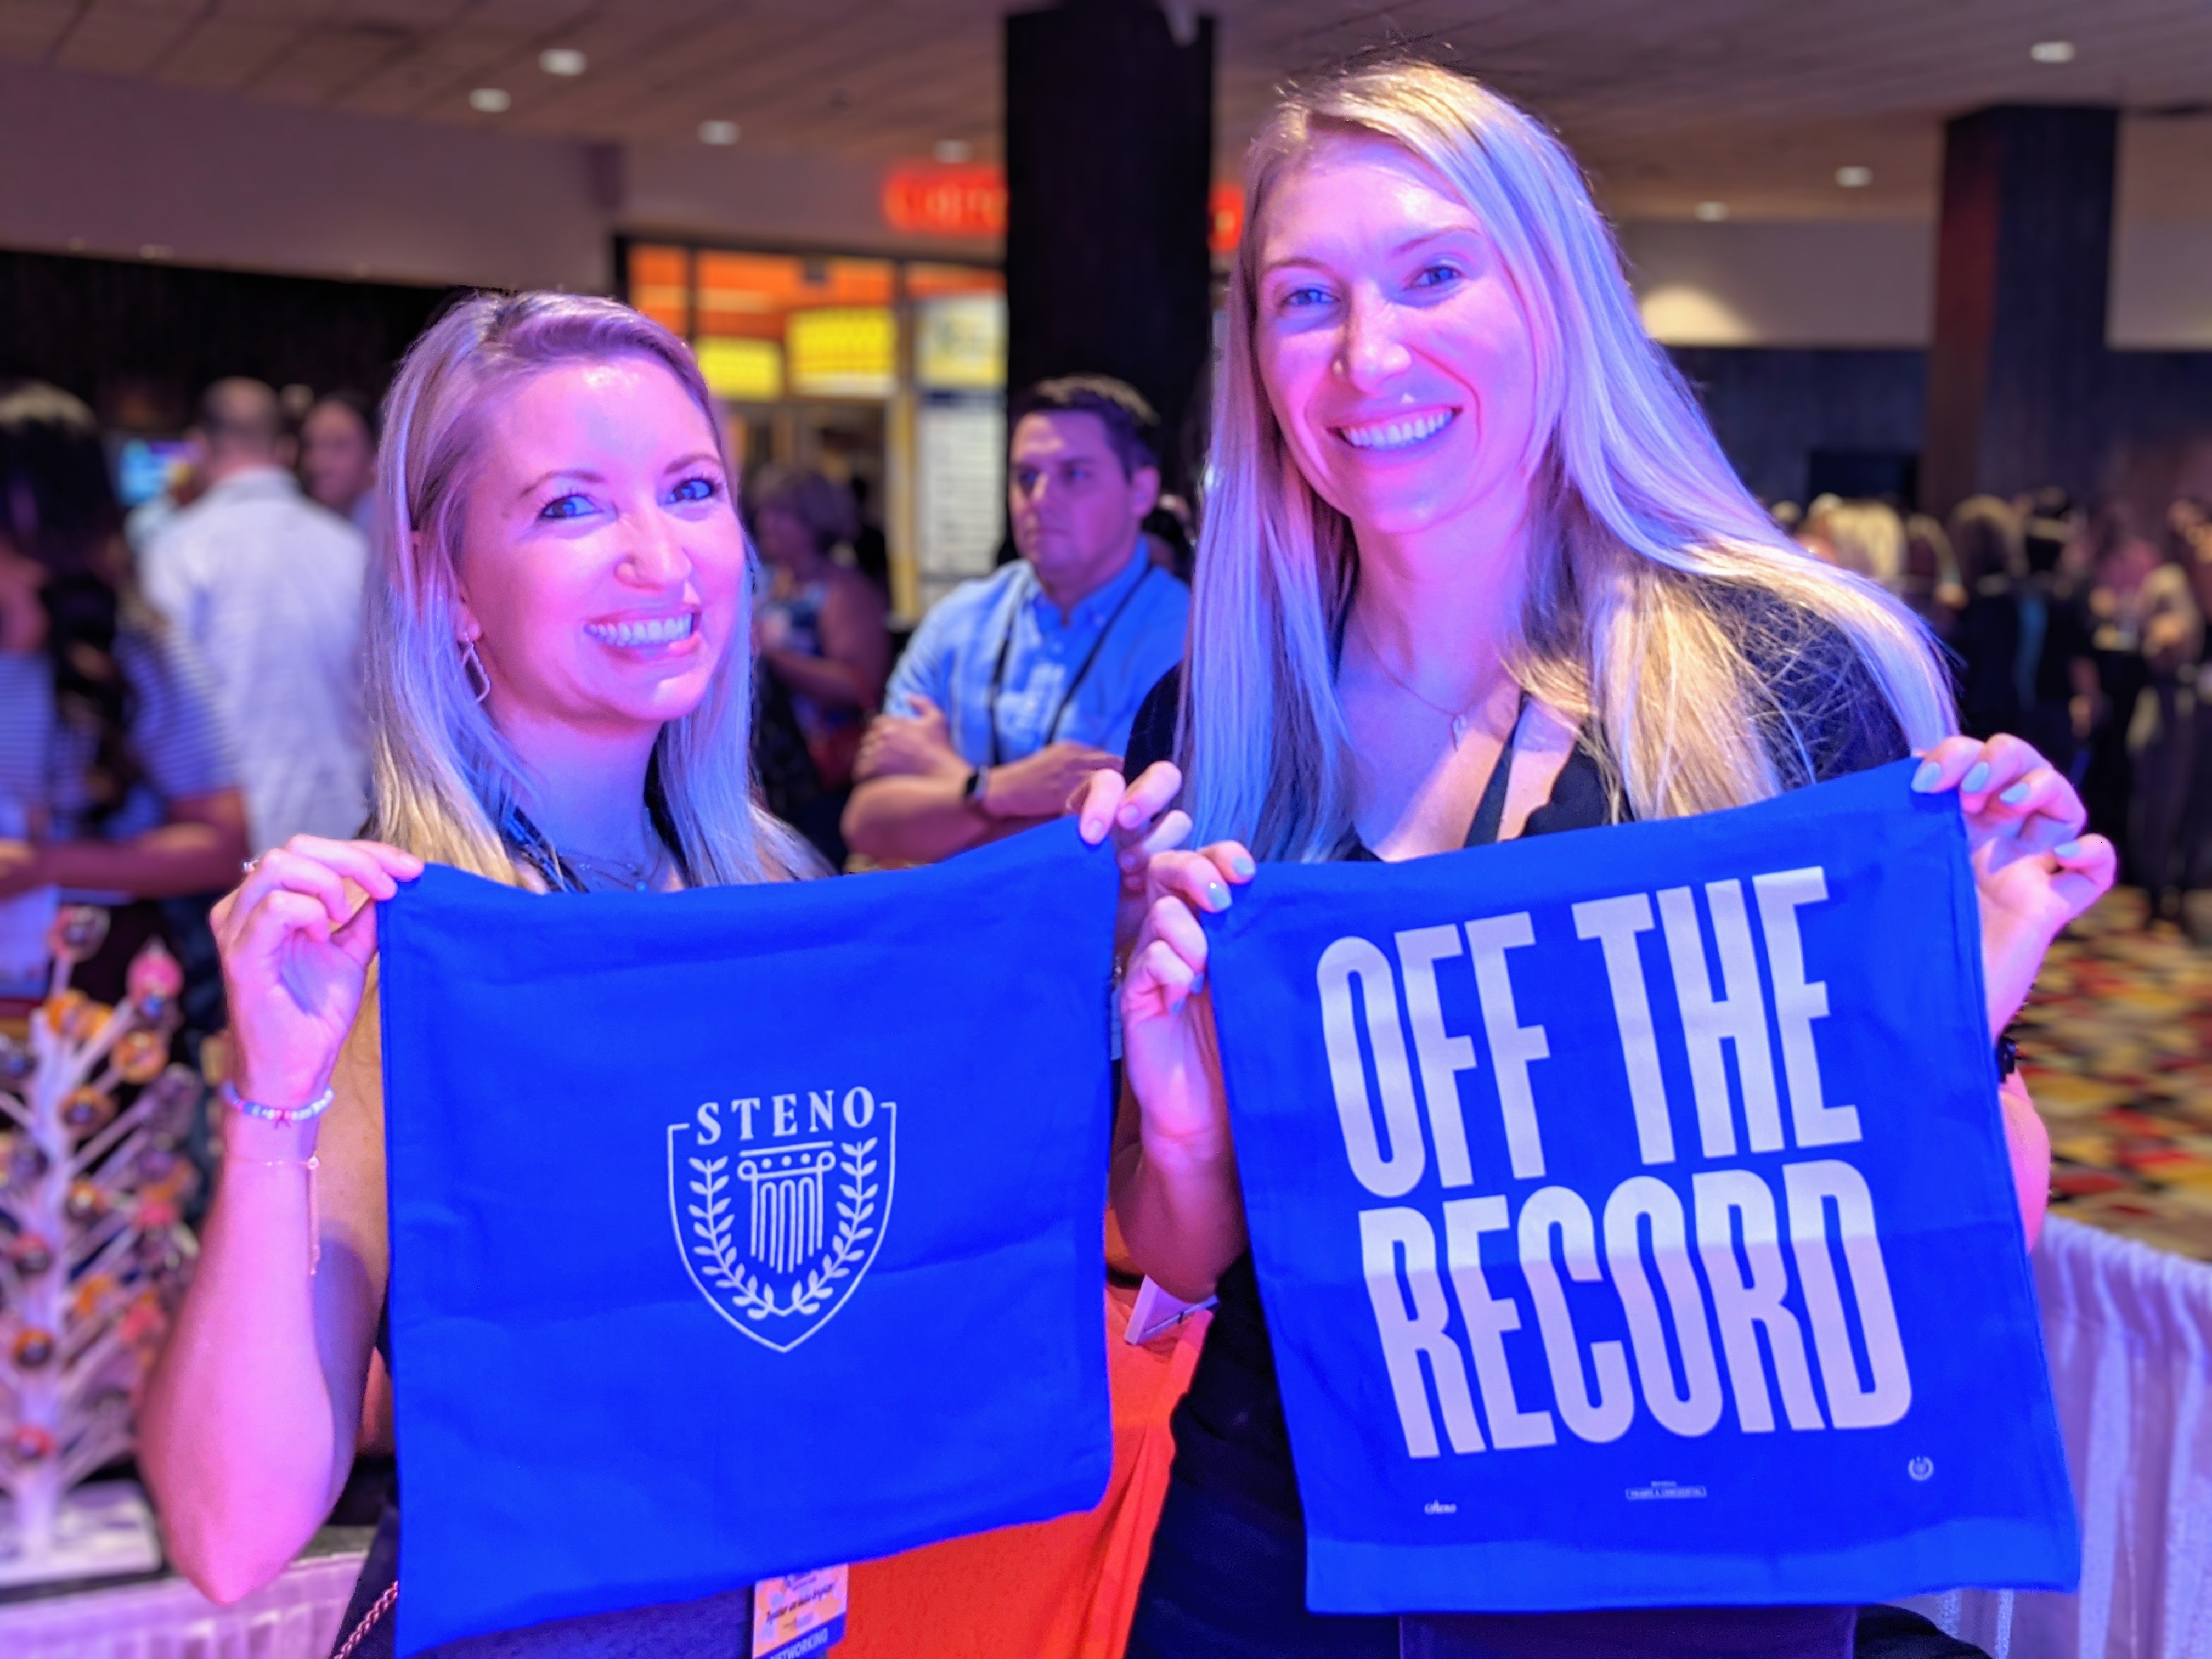 Two women hold blue tote bags that display a Steno logo and "Off the Record" 